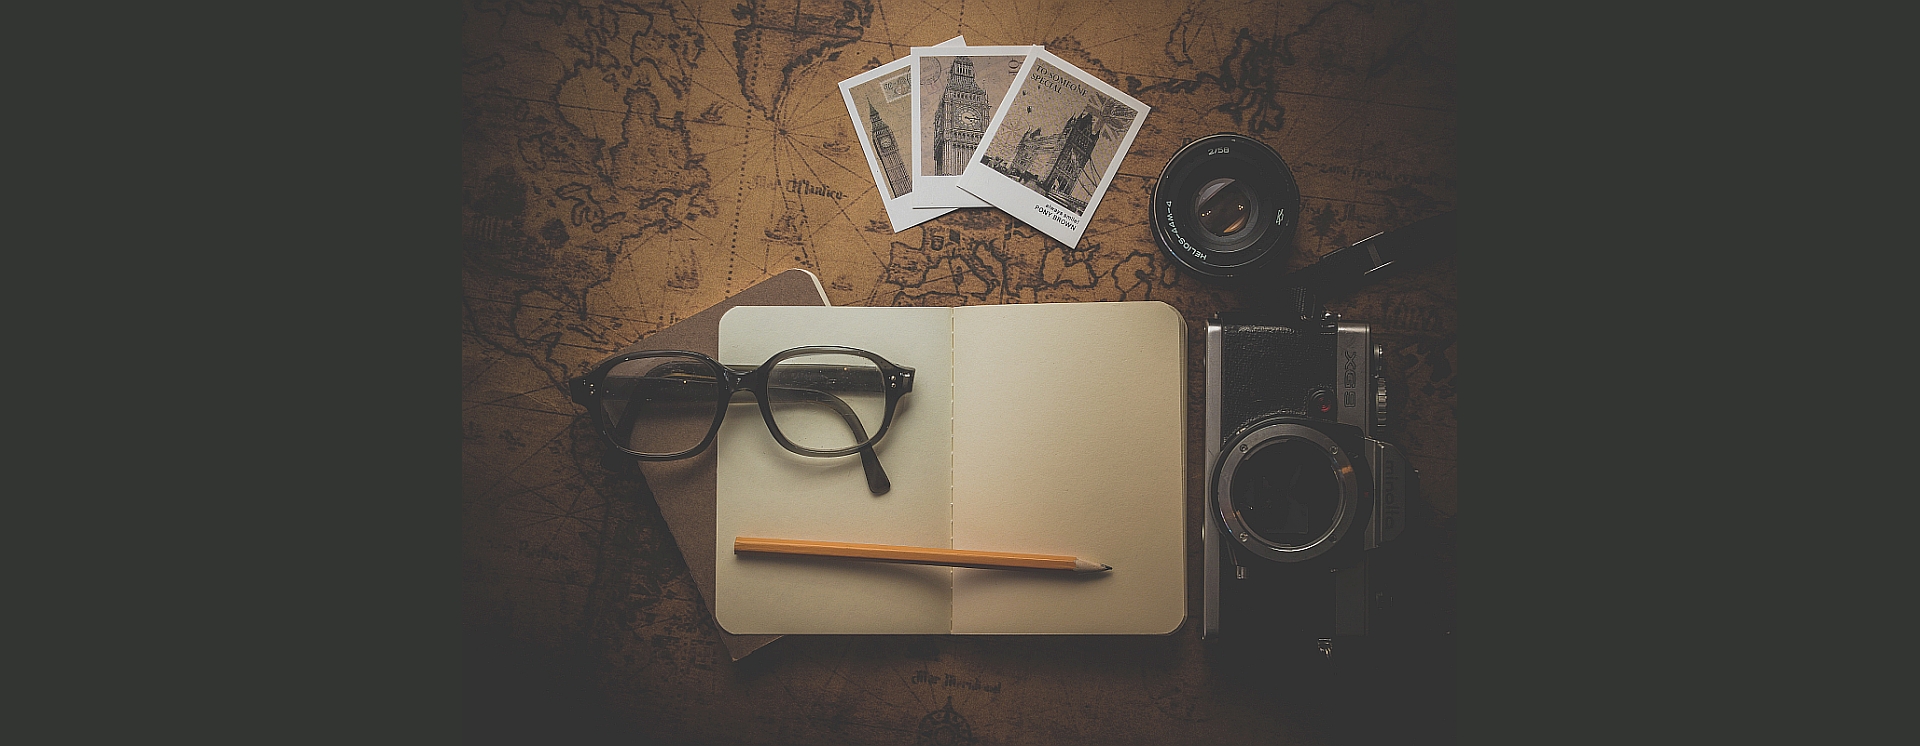 A pair of spectacles and a pencil rest on an open blank notebook. An old world map, camera and photographs are nearby.